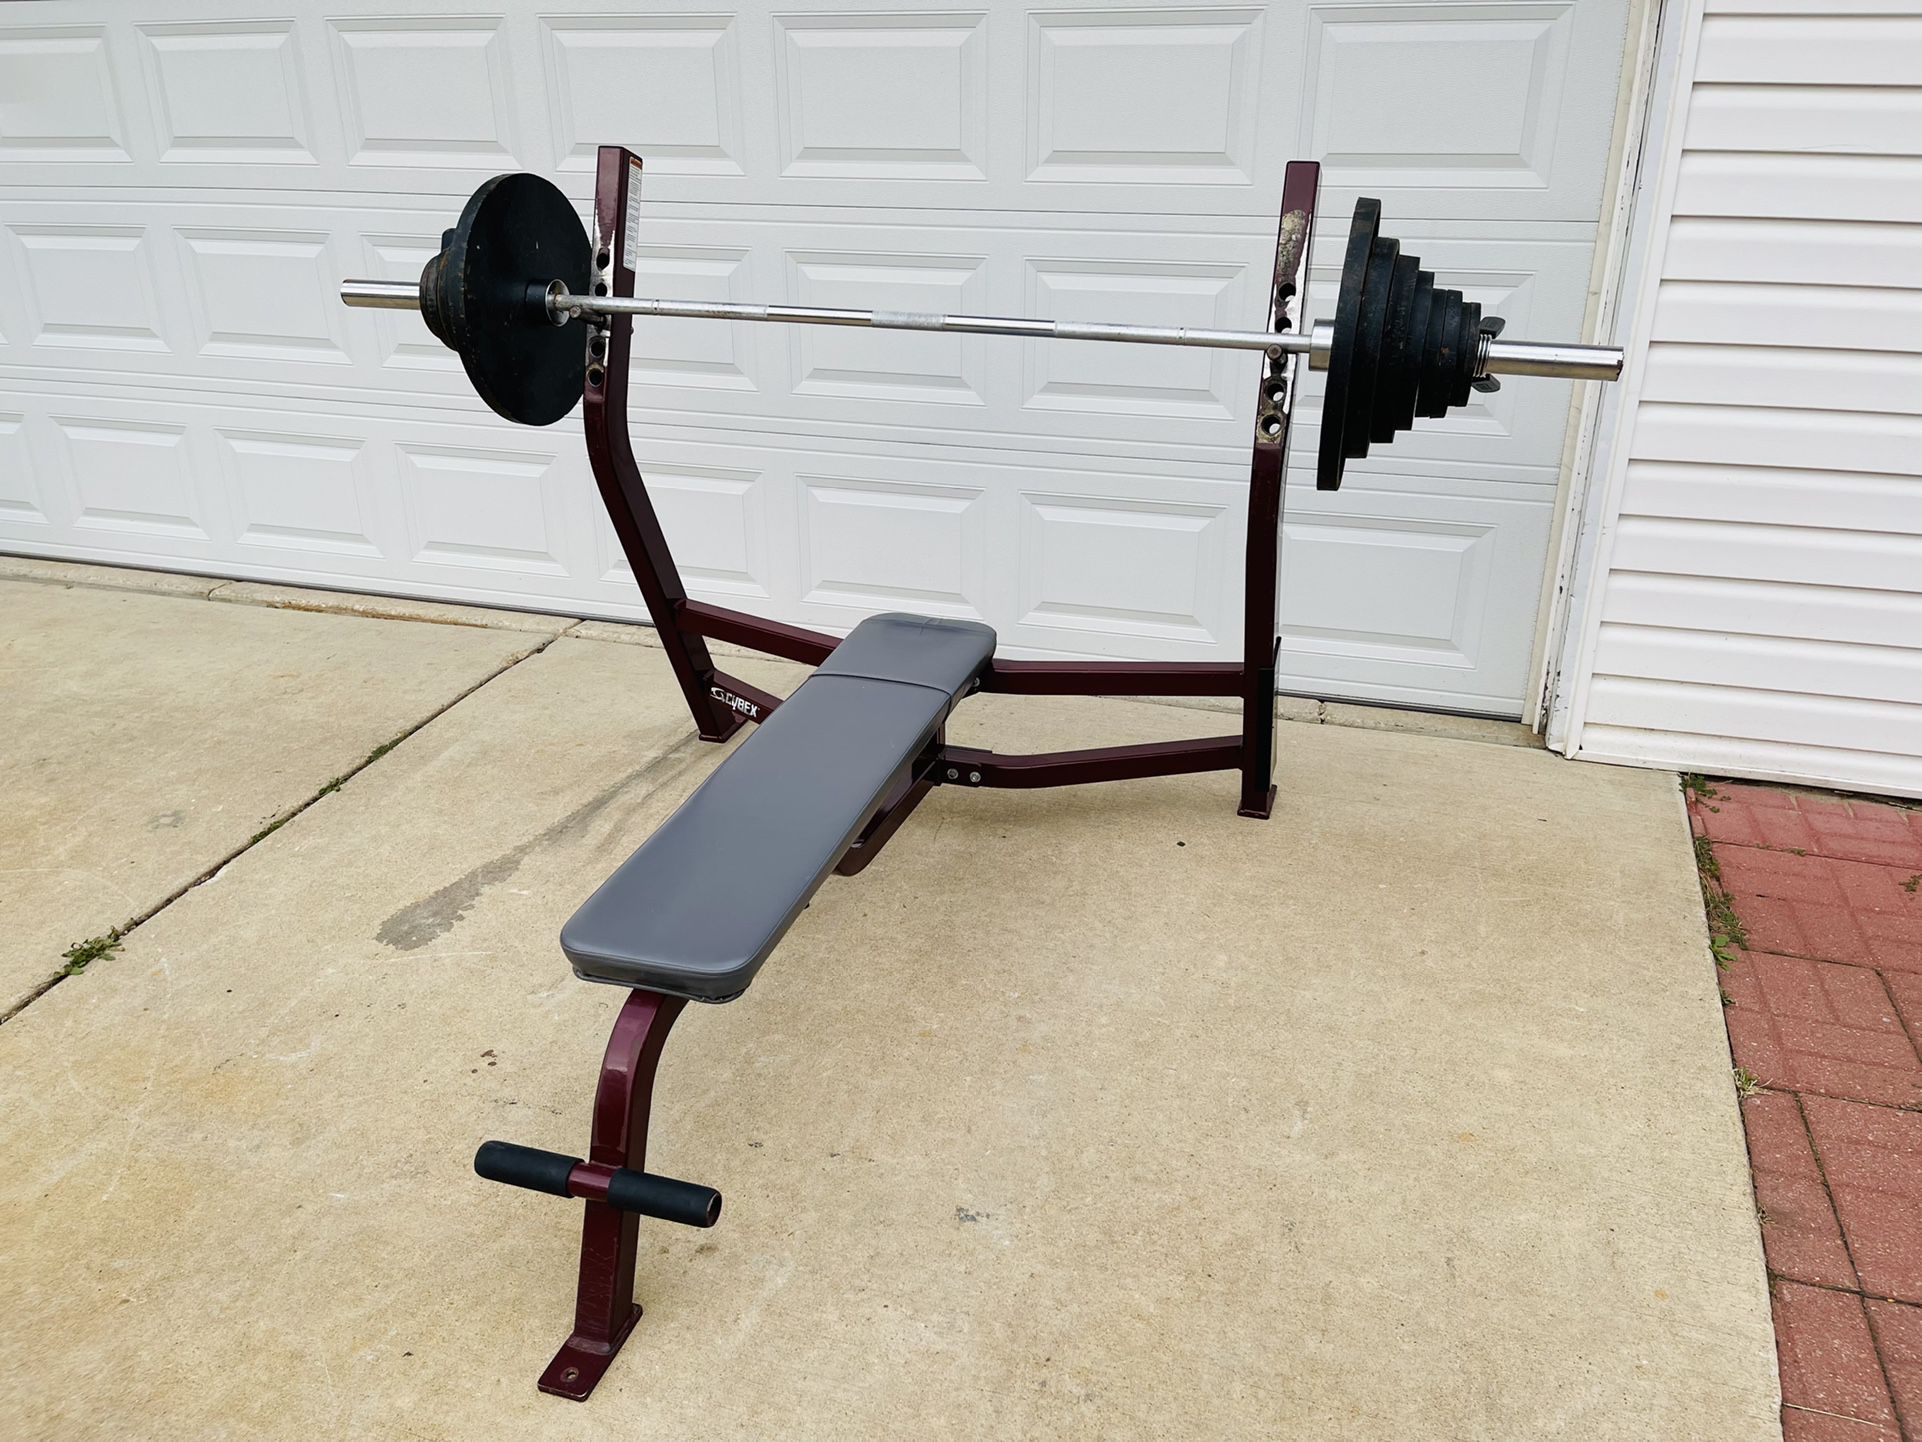 Bench - Gym Equipment - Cybex - Flat Bench - Olympic - Barbell - Weights - Plates - Workout - Fitnes